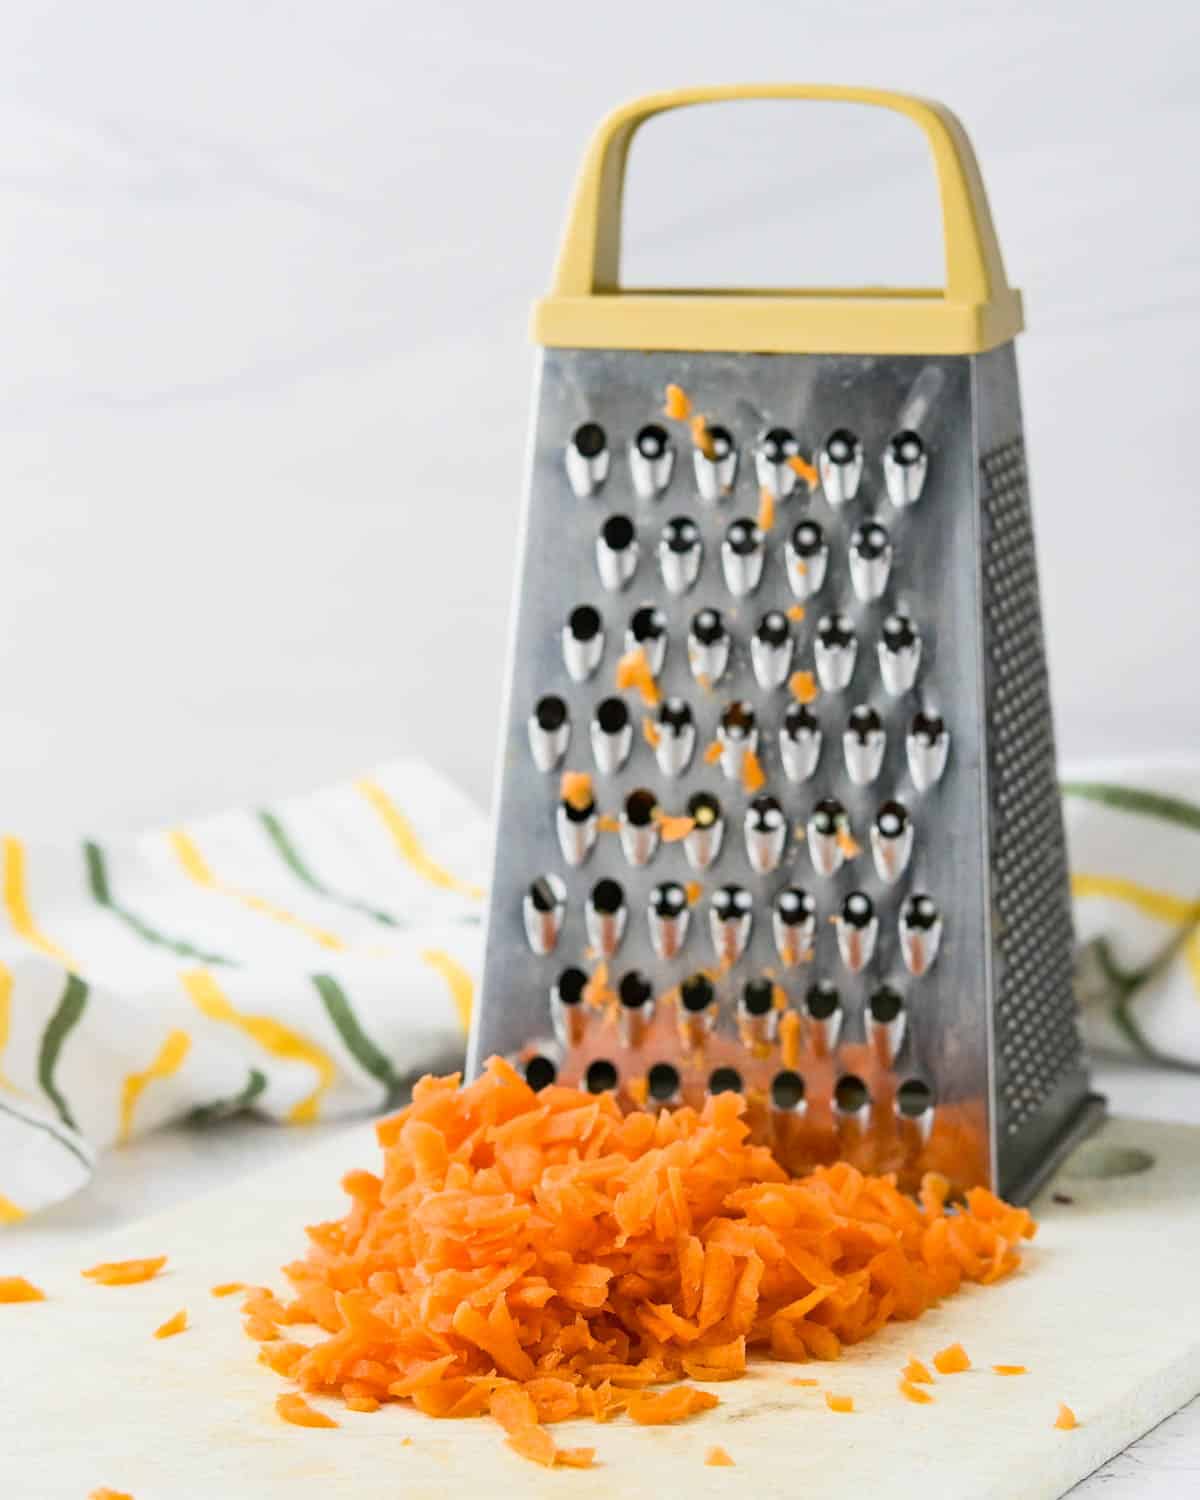 grating carrots on a box grater.